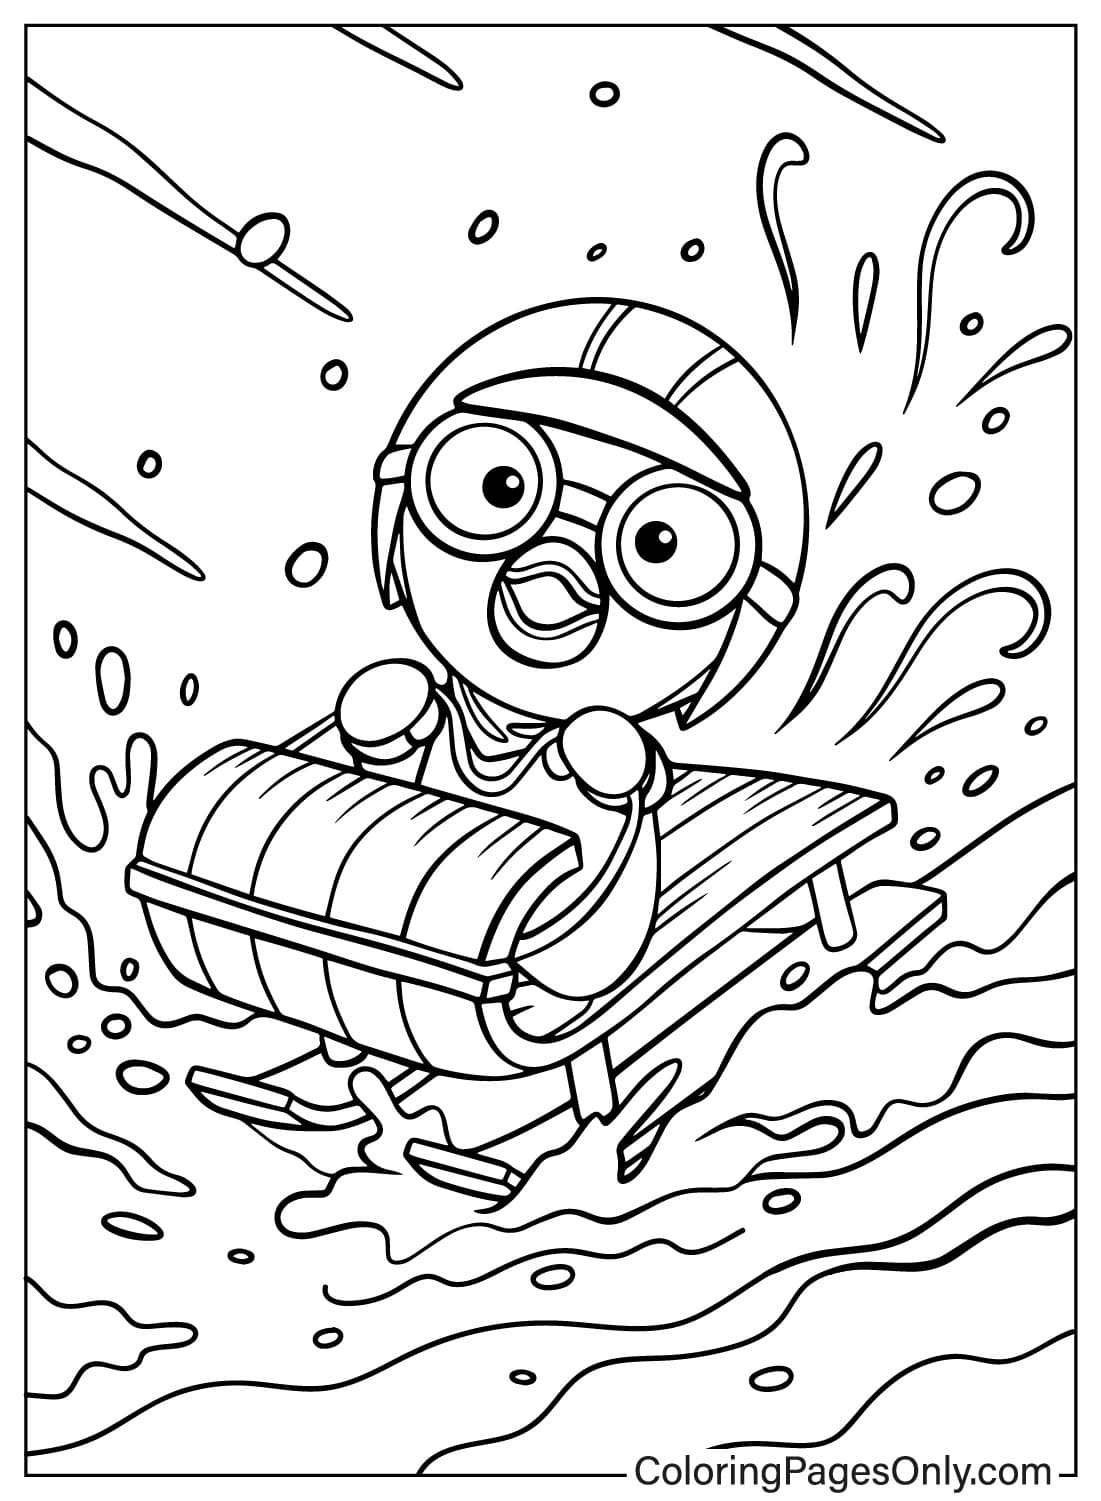 Images Pororo Coloring Page from Pororo the Little Penguin